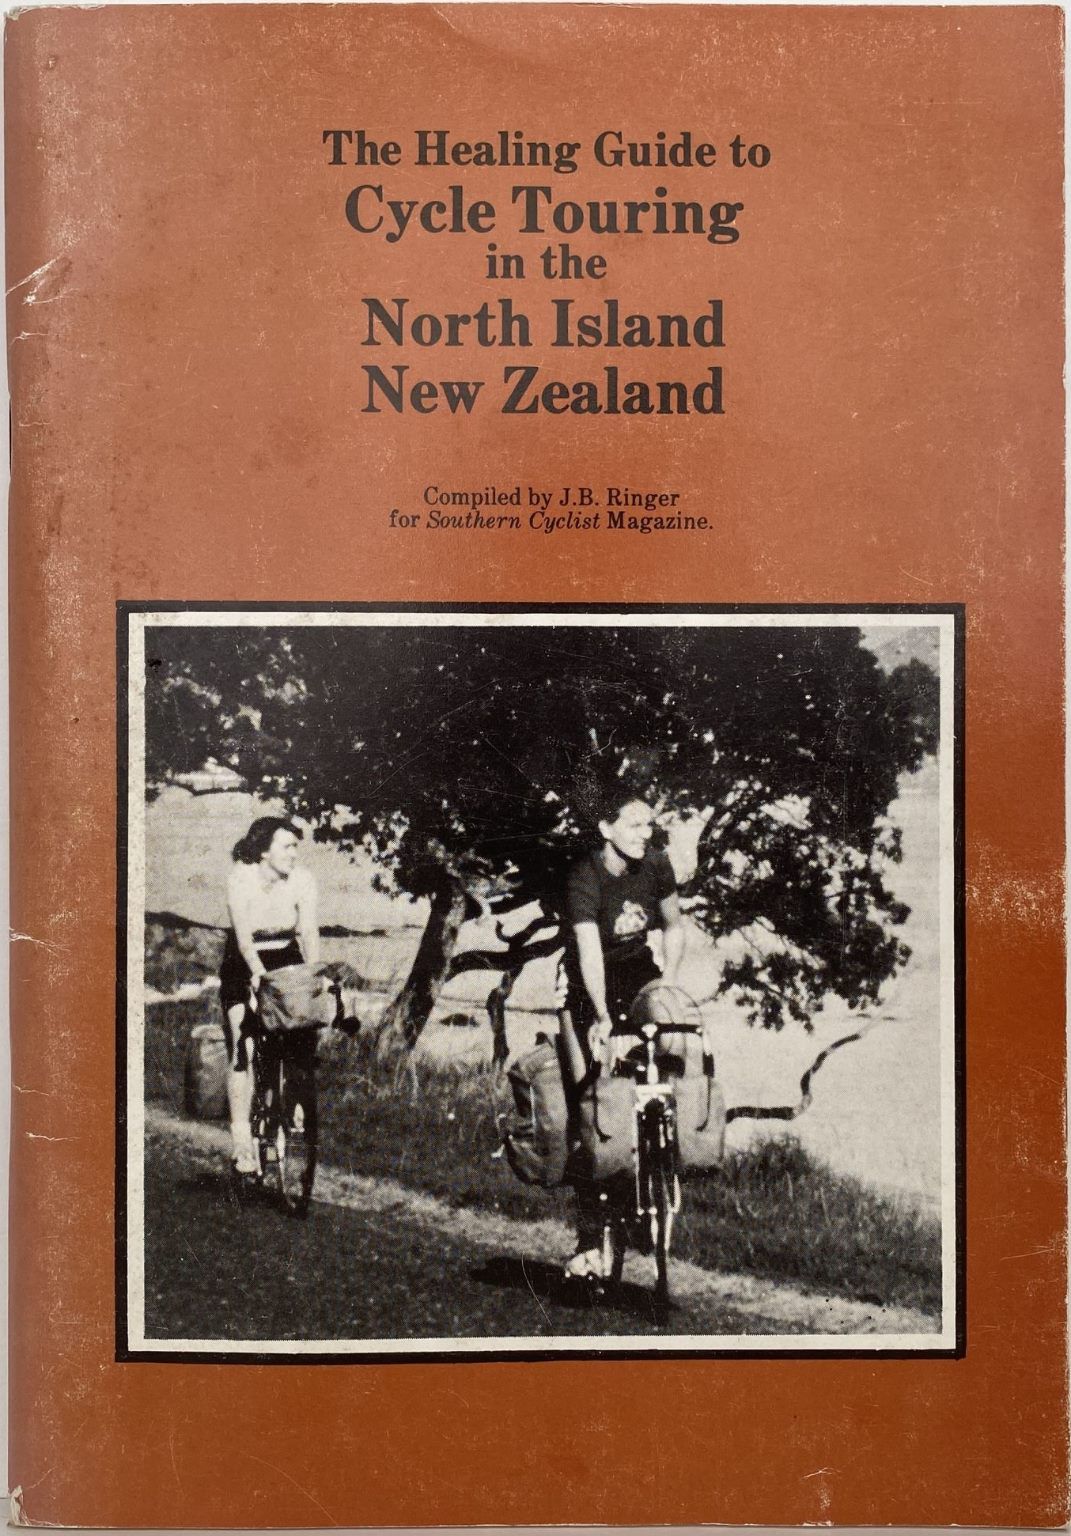 The Healing Guide to CYCLE TOURING in the NORTH ISLAND of New Zealand